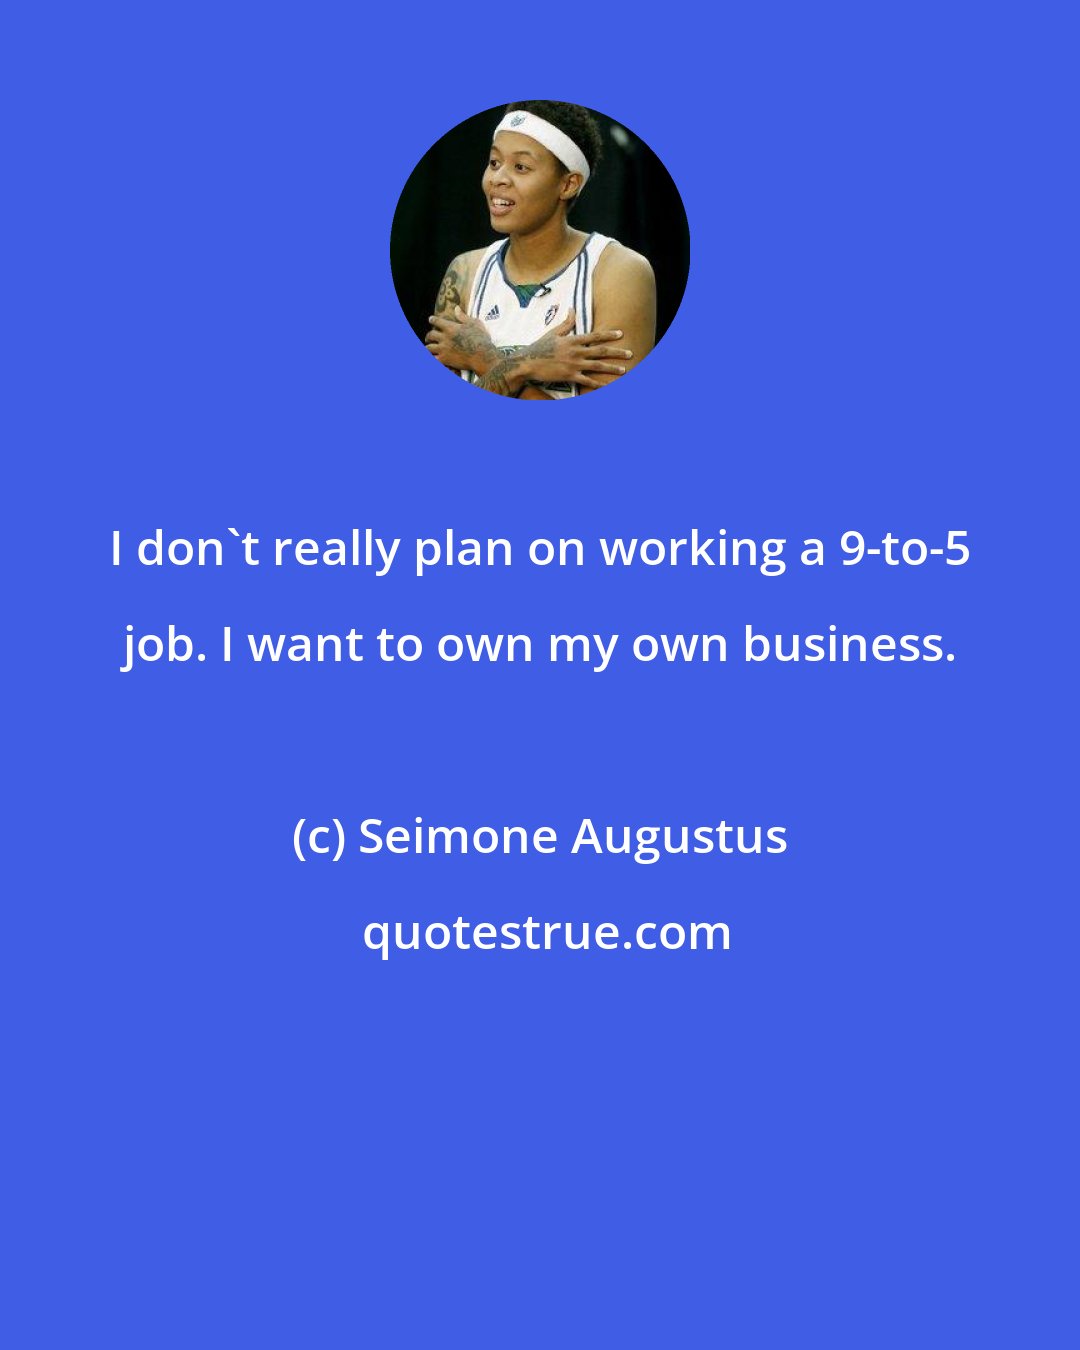 Seimone Augustus: I don't really plan on working a 9-to-5 job. I want to own my own business.